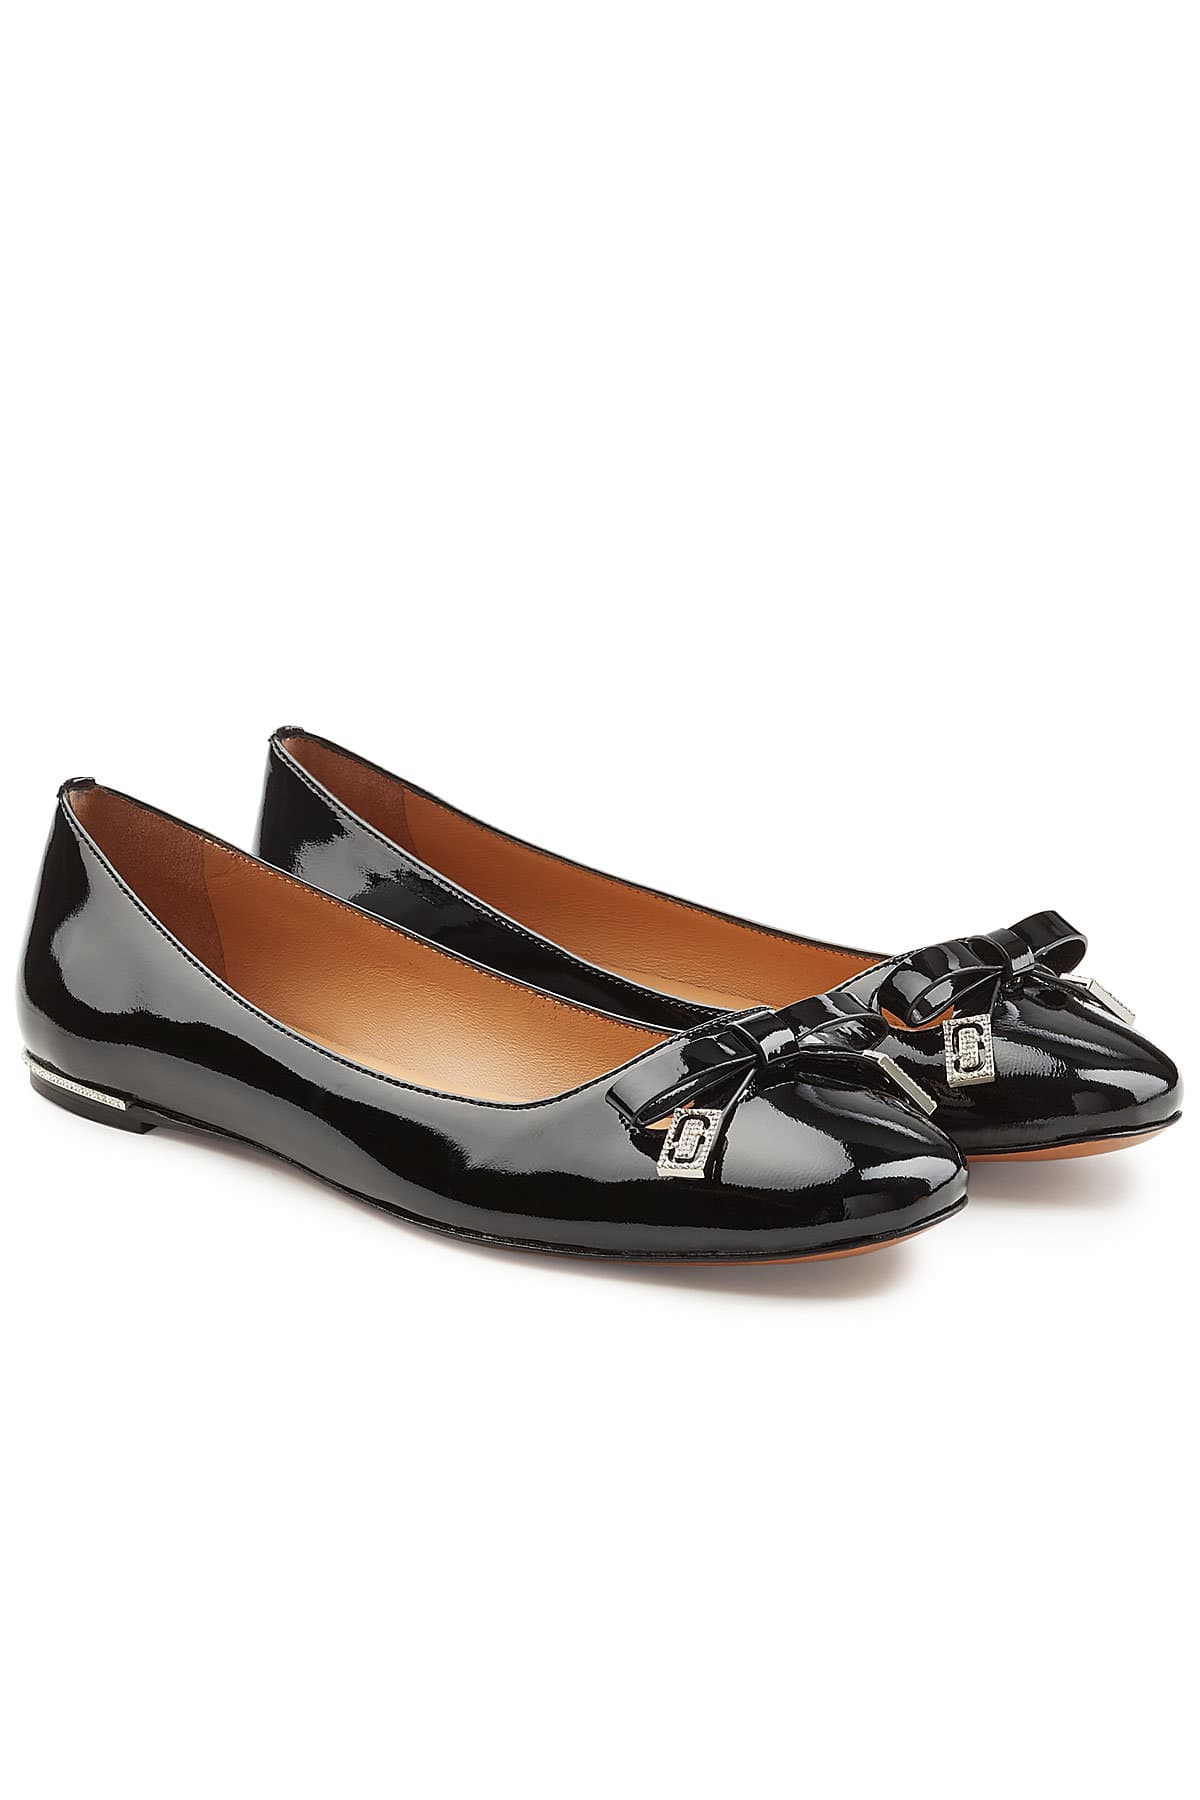 Marc Jacobs - Sophie Patent Leather Ballerina Flats